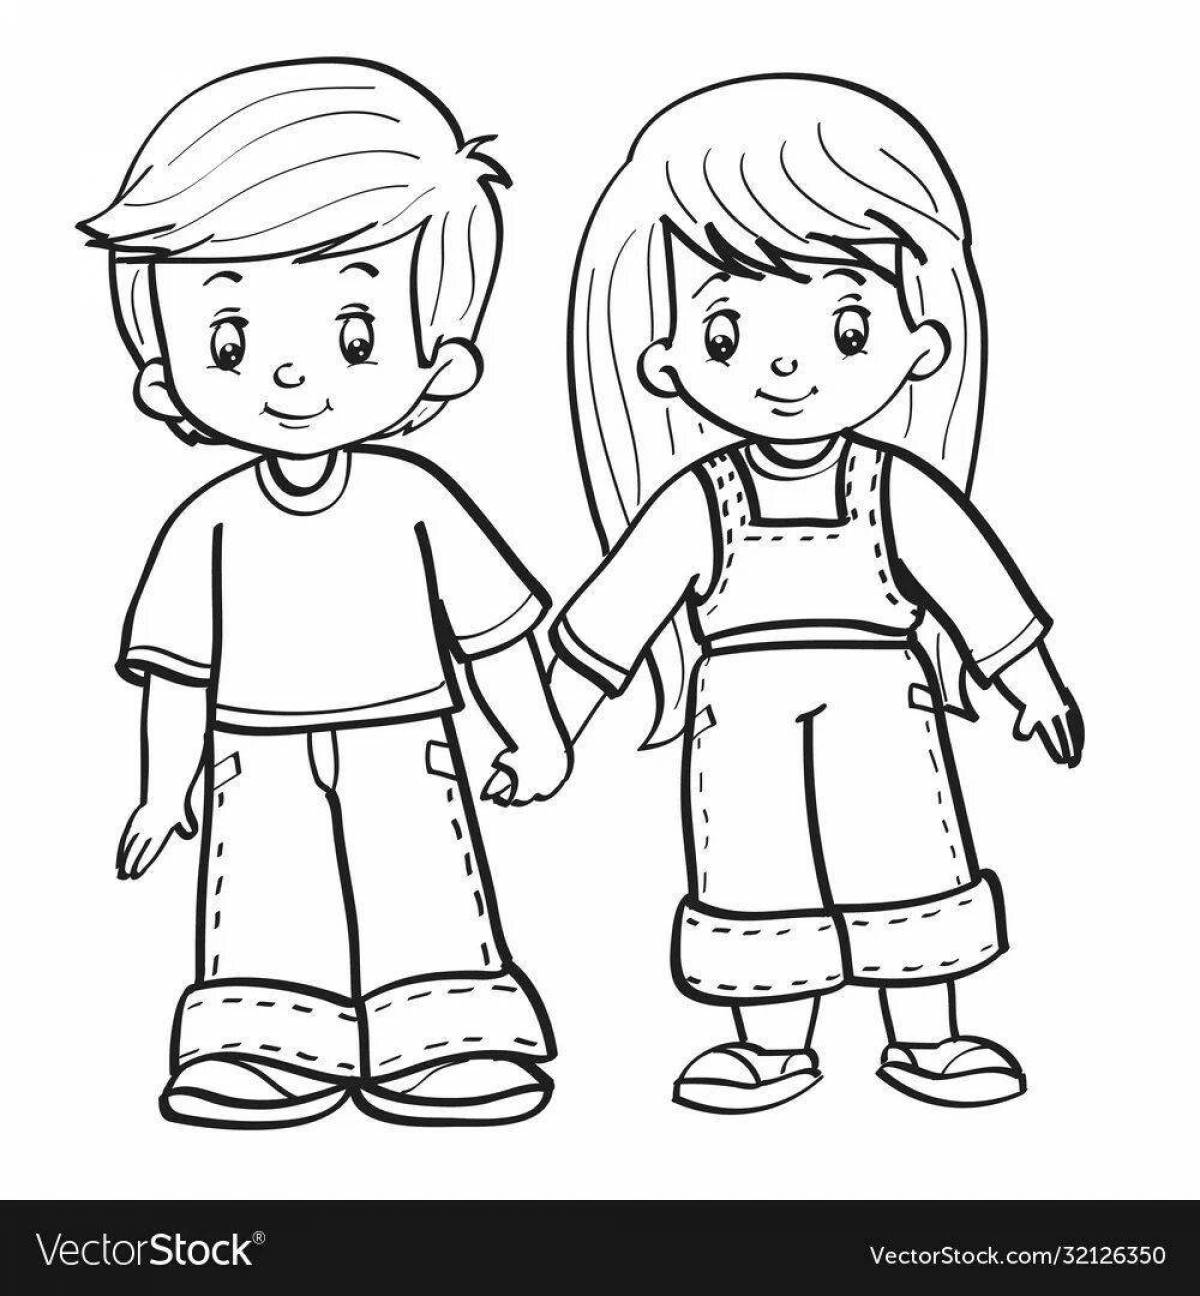 Delightful coloring drawing of a girl and a boy